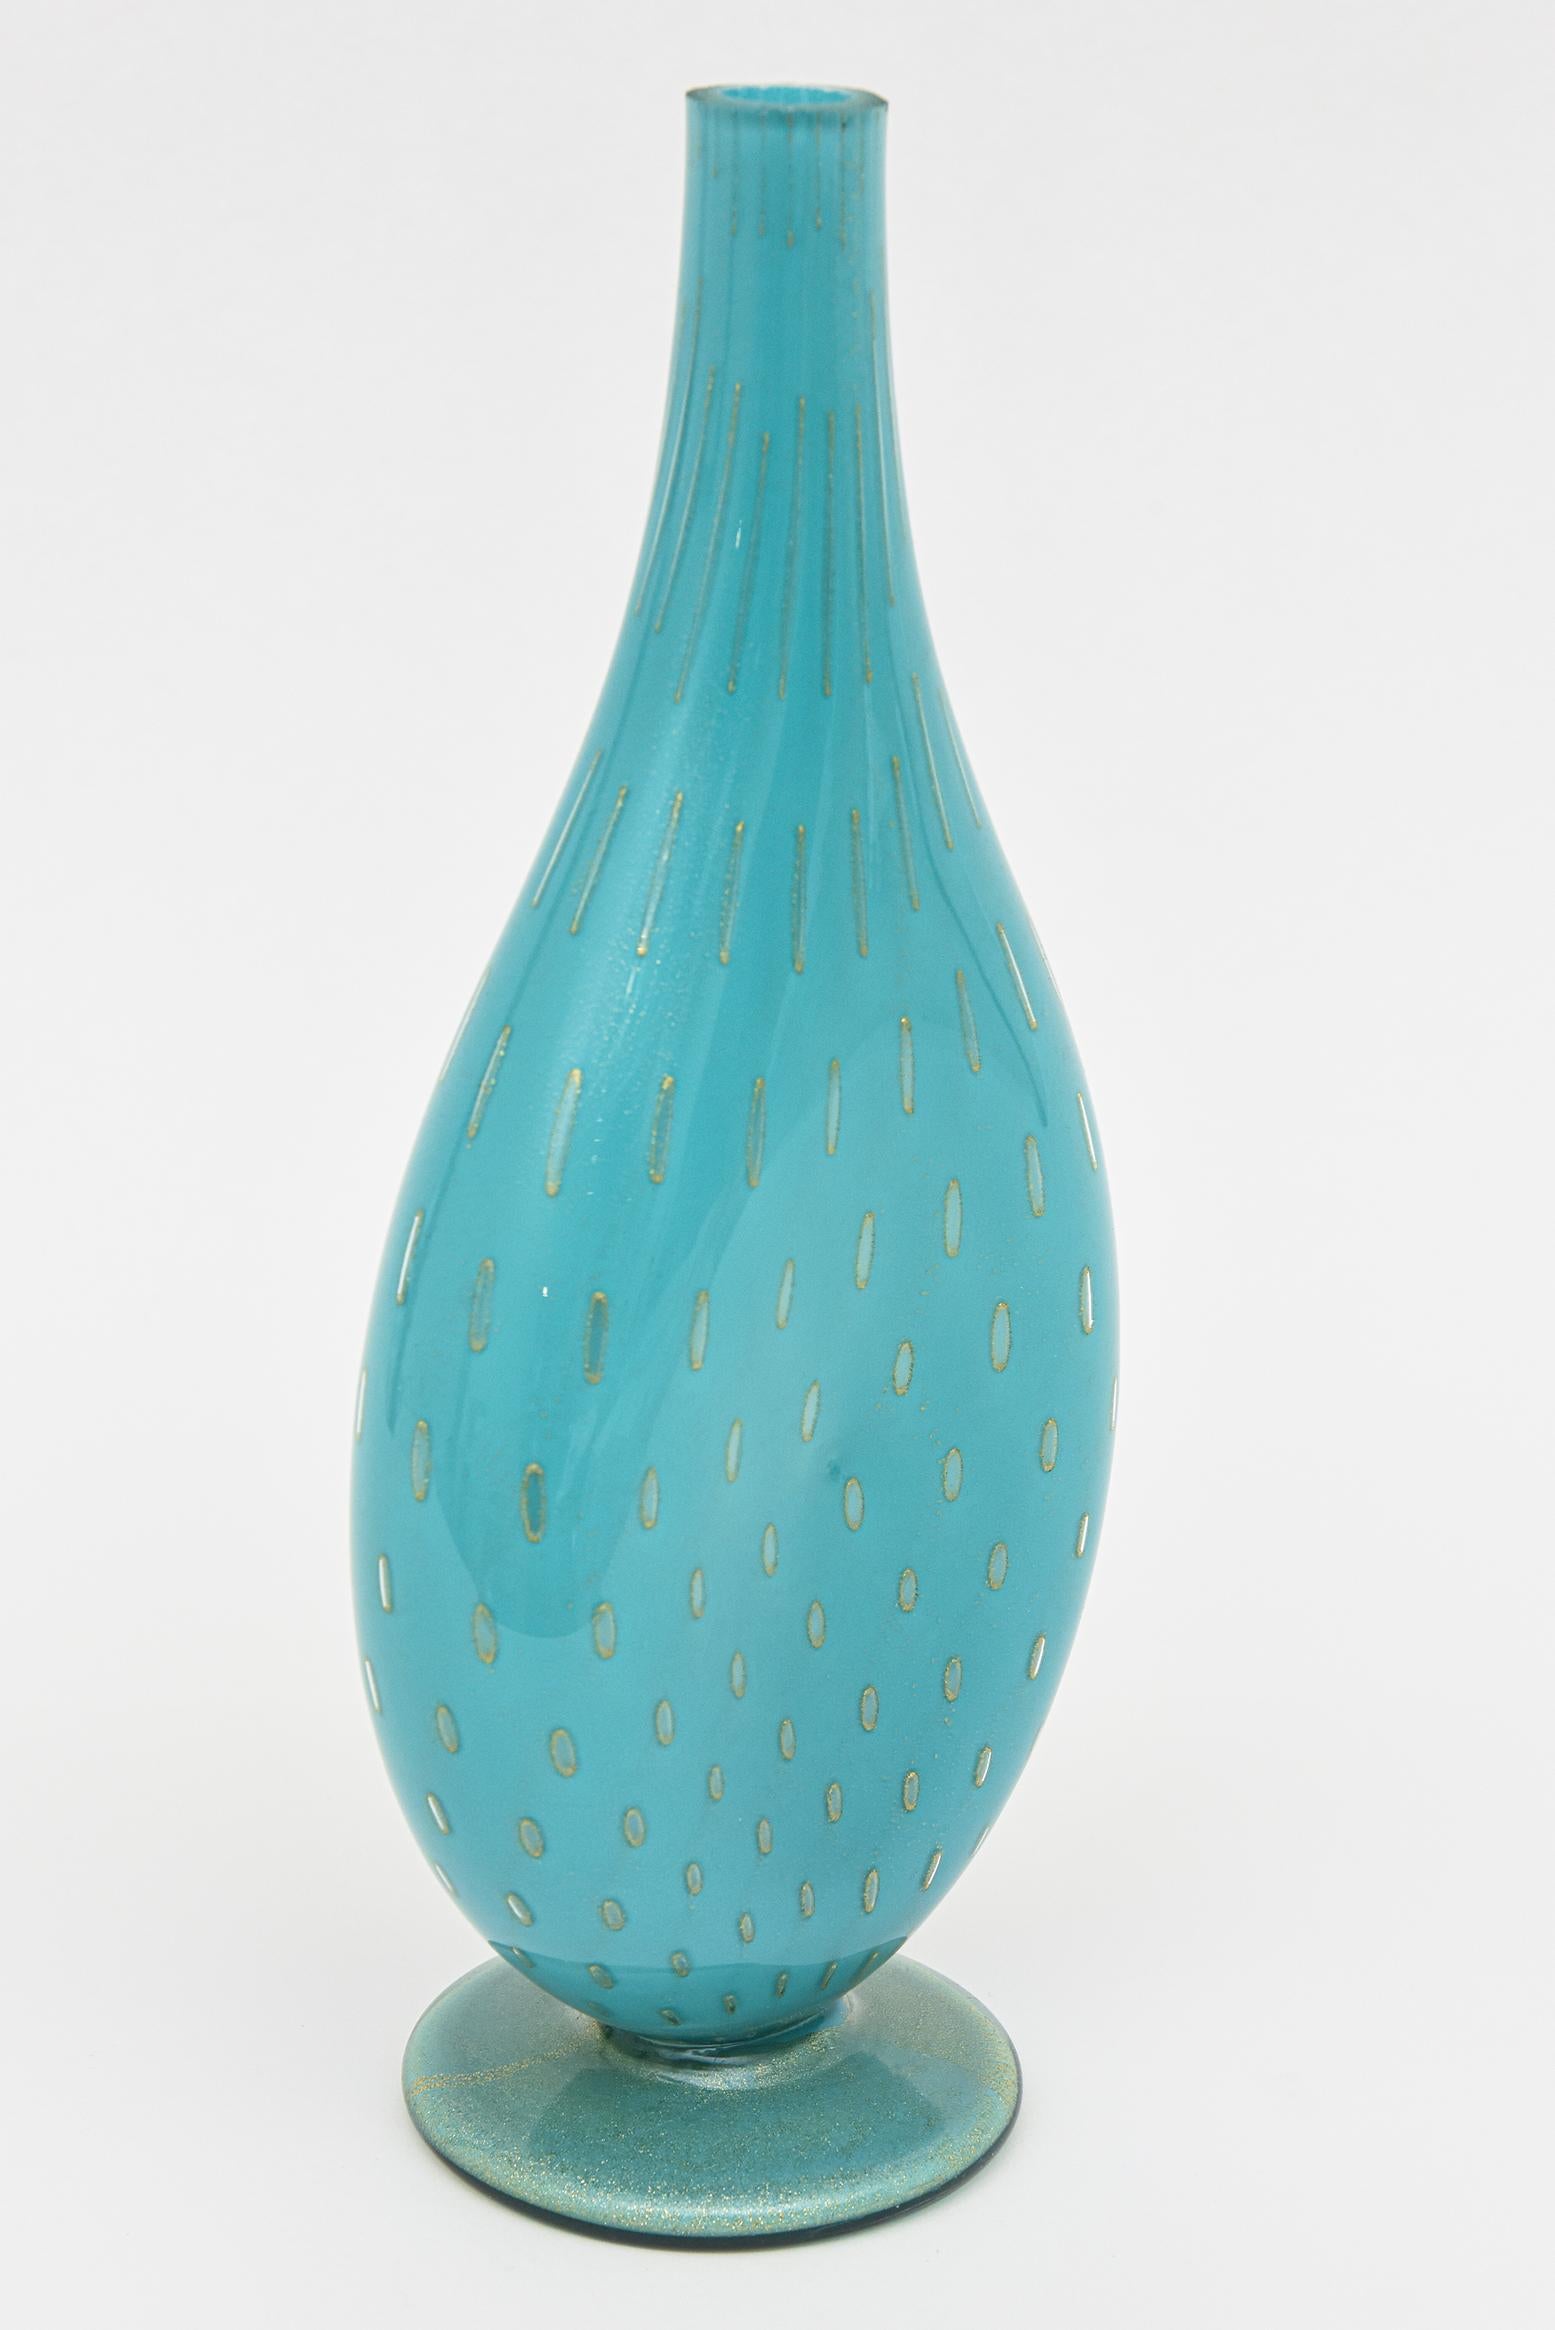 Vintage Barovier e Toso Murano Turquoise Glass Vessel Bottle With Gold Droplets For Sale 3